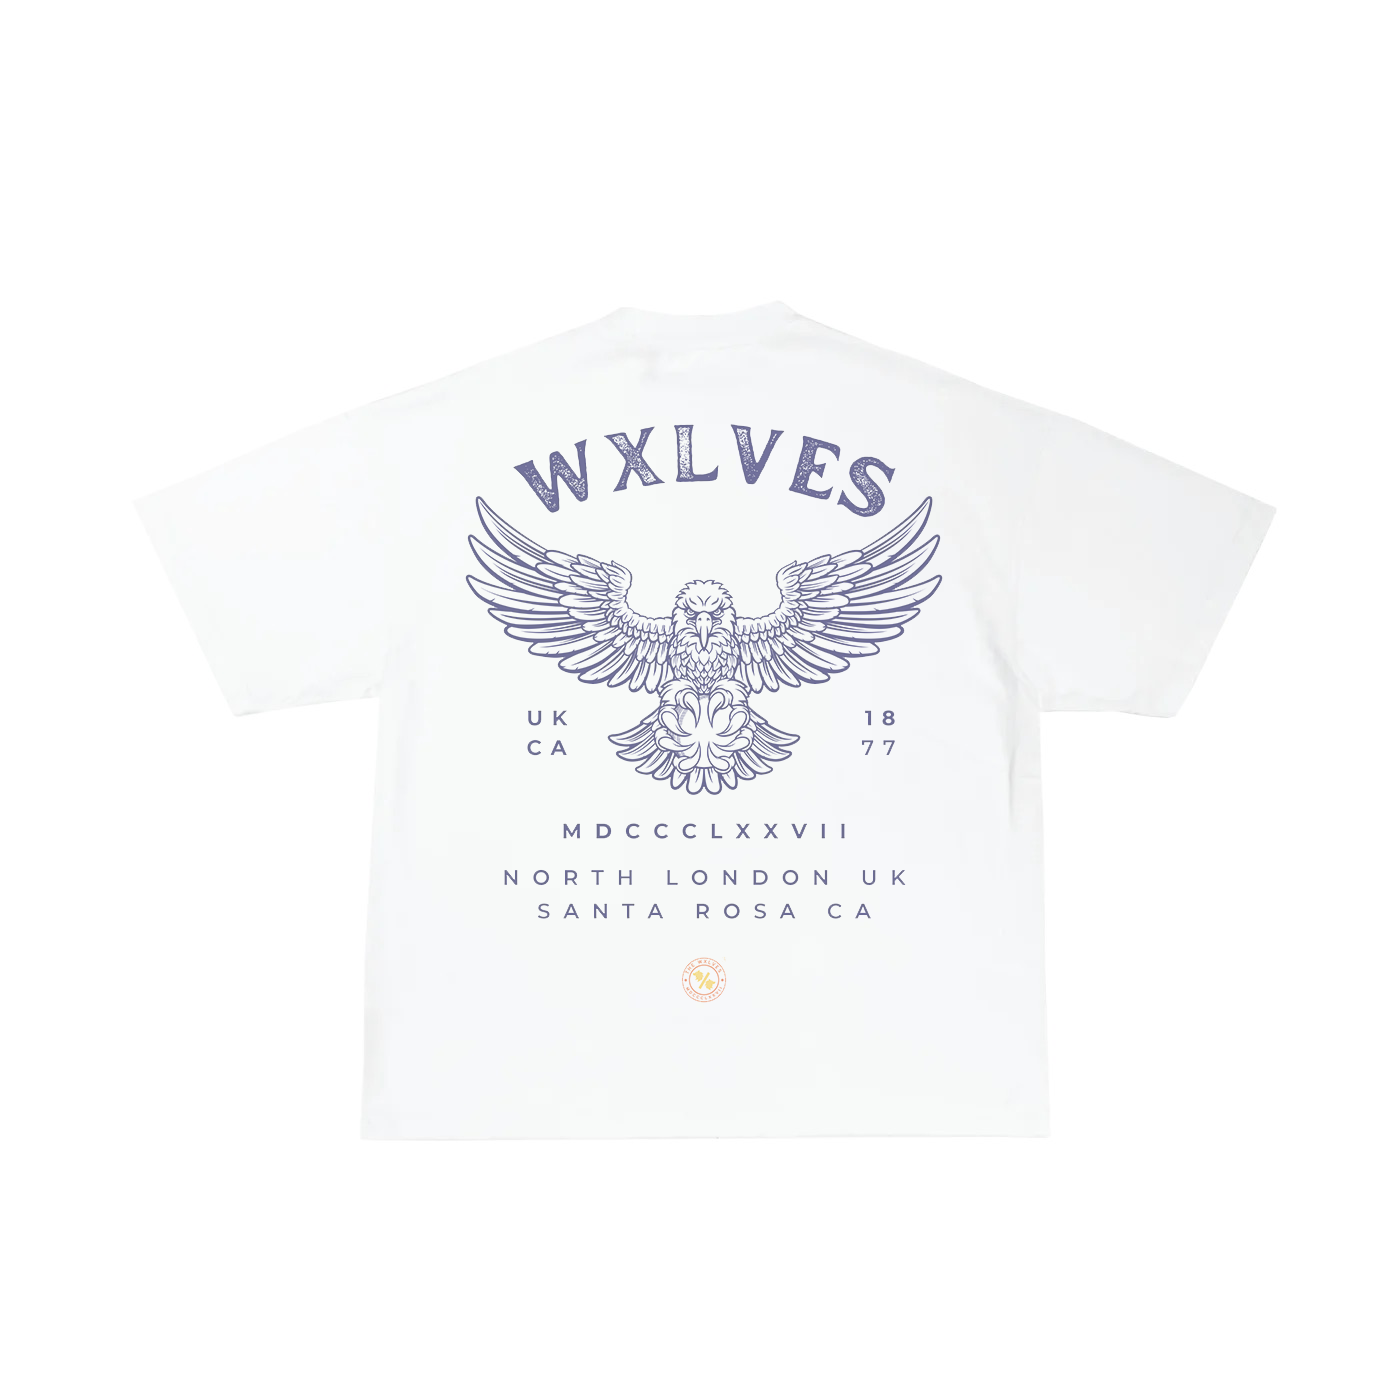 The Western Wxlf Tee - Up to Size 5XL